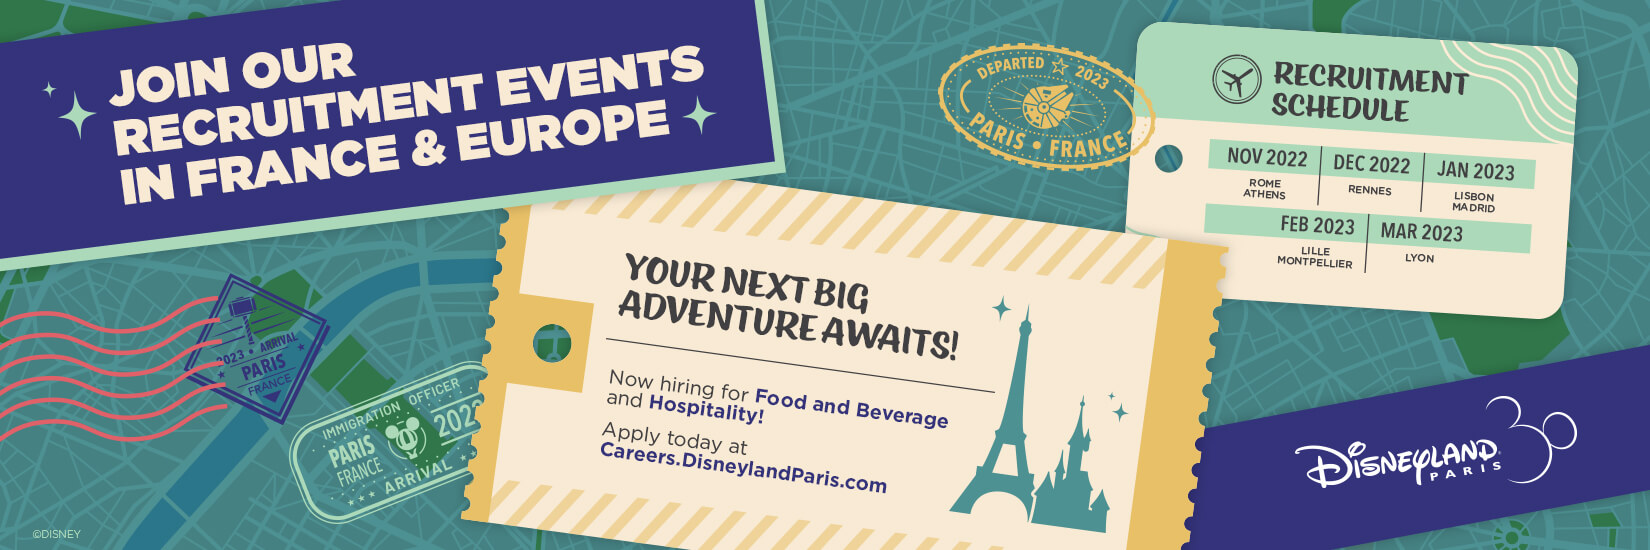 Join Our Recruitment Events in France & Europe.
Your Next Big Adventure Awaits.
Now Hiring for Food and Beverage and Hospitality!
Apply today at Careers.DisneylandParis.com  
Recruitment Schedule - Nov 2022 - Rome, Athens, Dec 2022 - Rennes, Jan 2023 - Lisbon, Madrid, Feb 2023 - Lille, Montpellier, Mar 2022 - Lyon